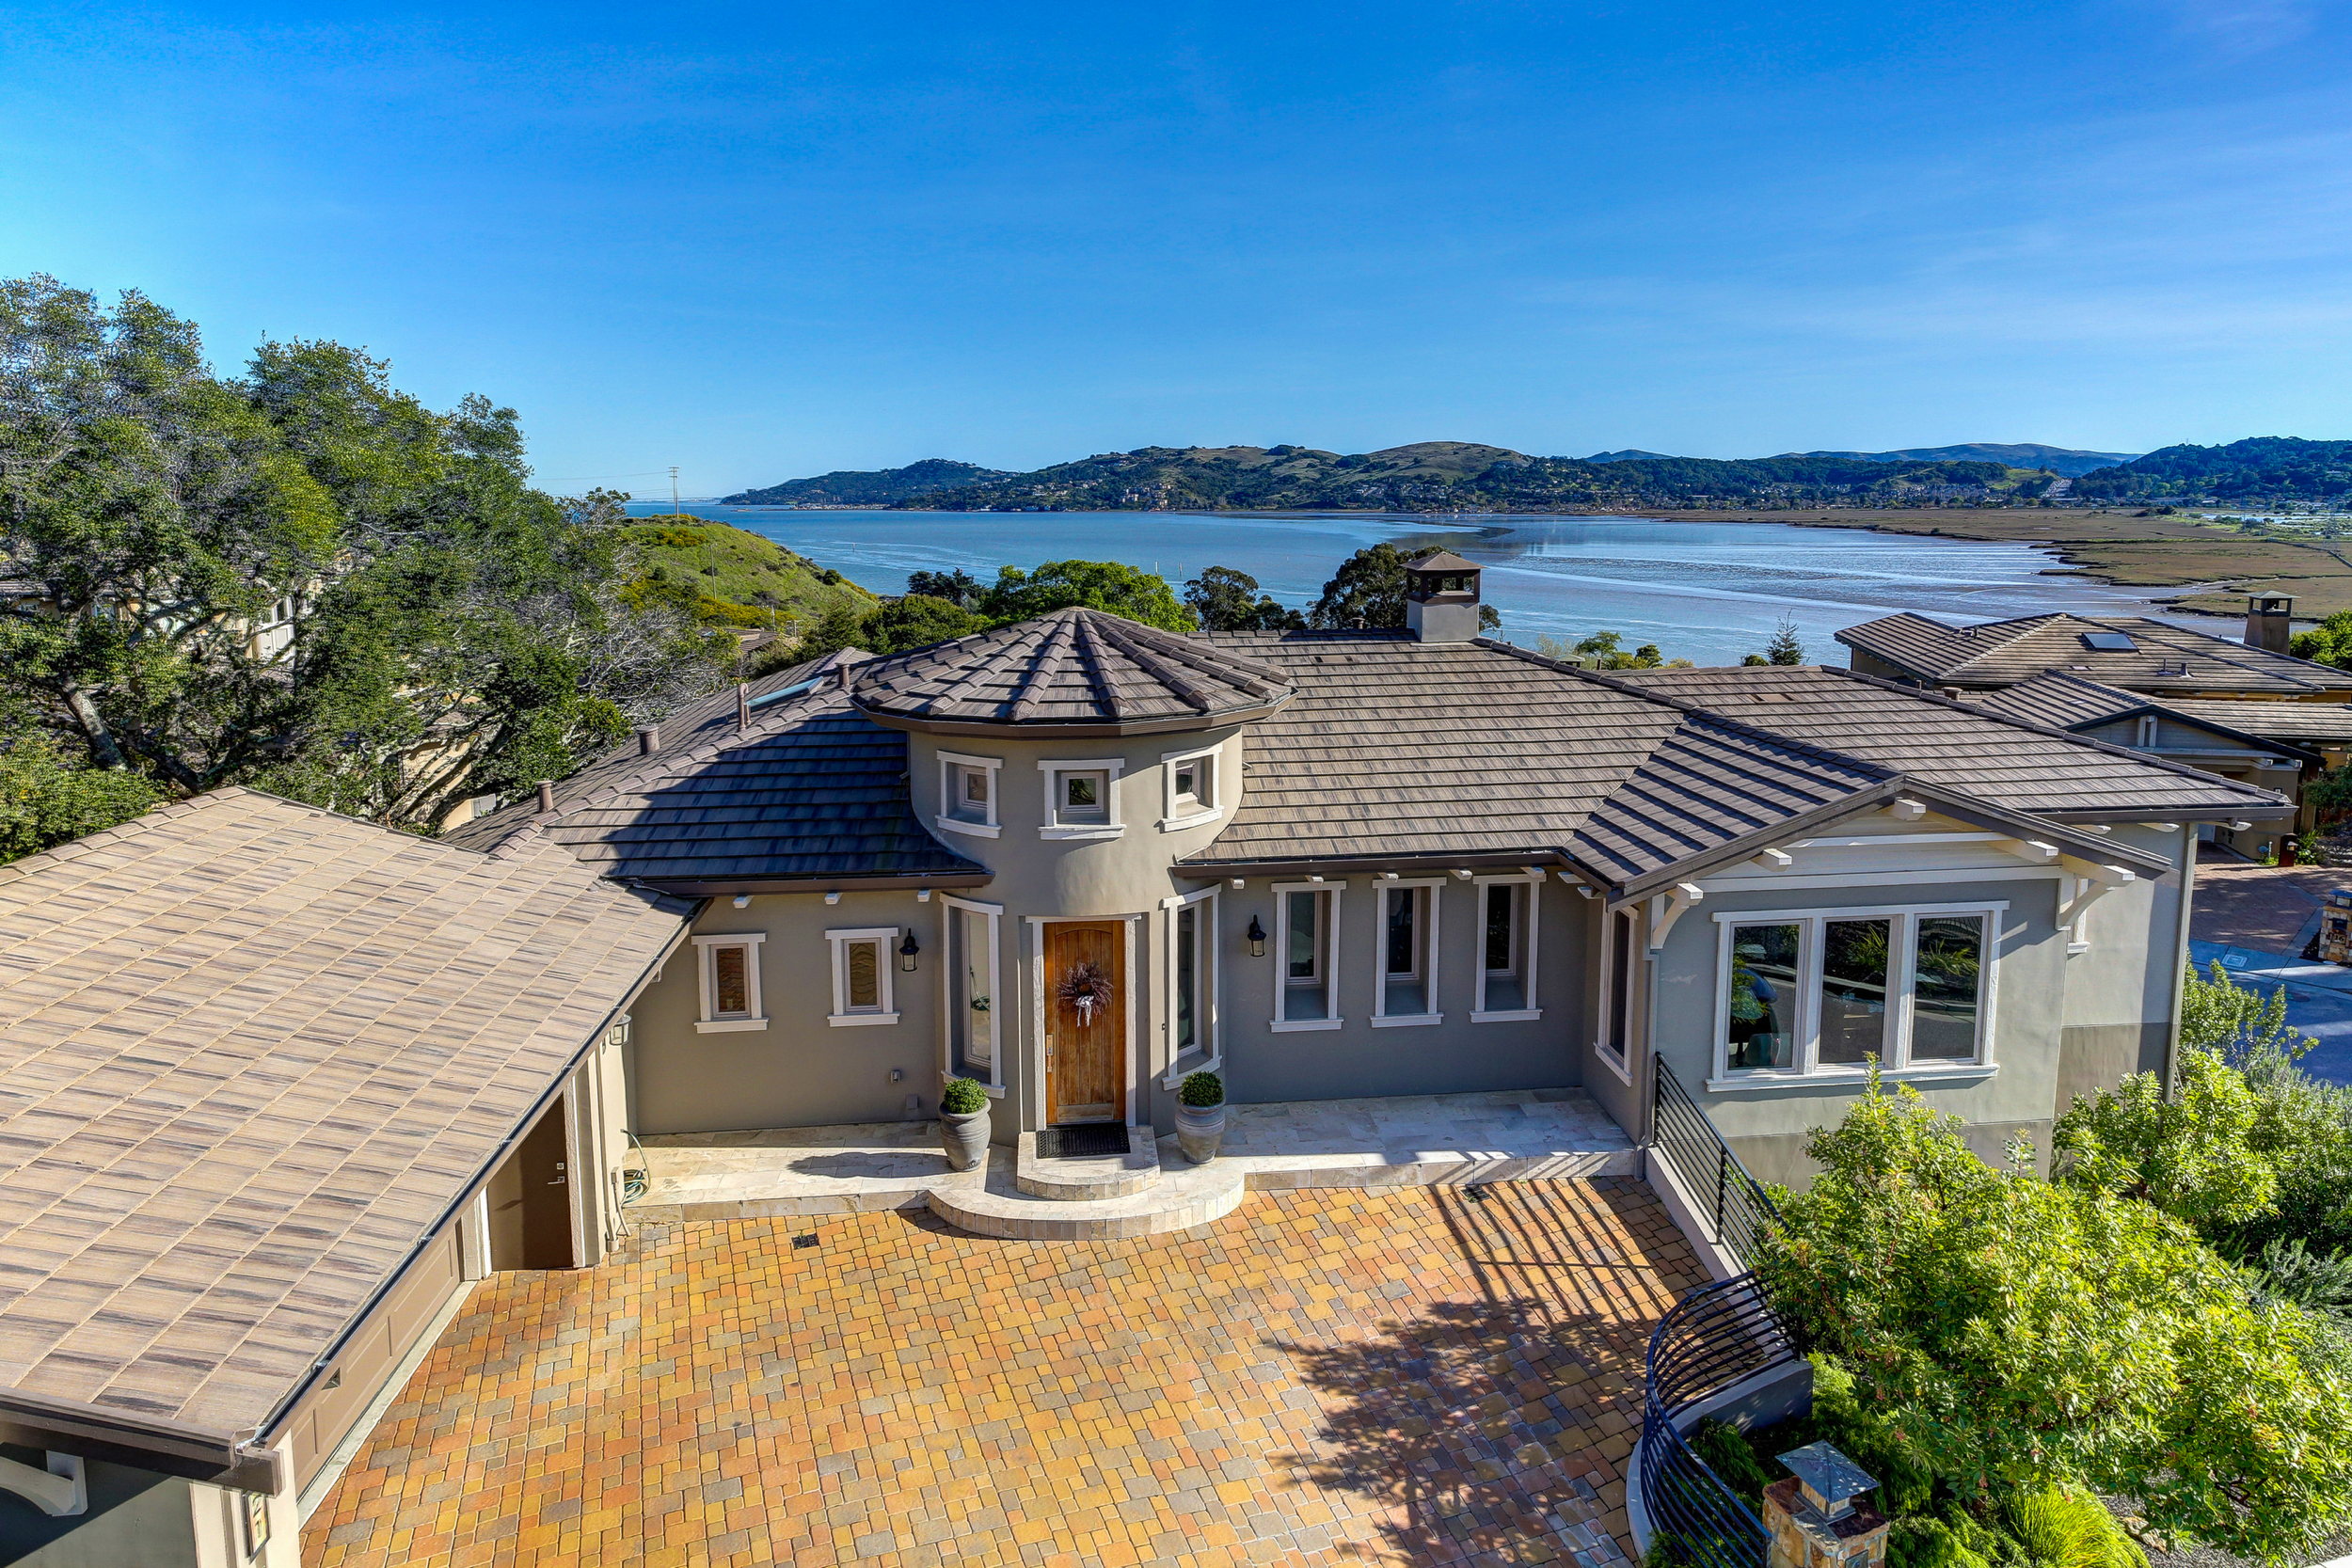 21 Drakes Cove Larkspur Best Realtor 04 MLS - Own Marin Pacific Union - Best Realtor in Marin County.jpg